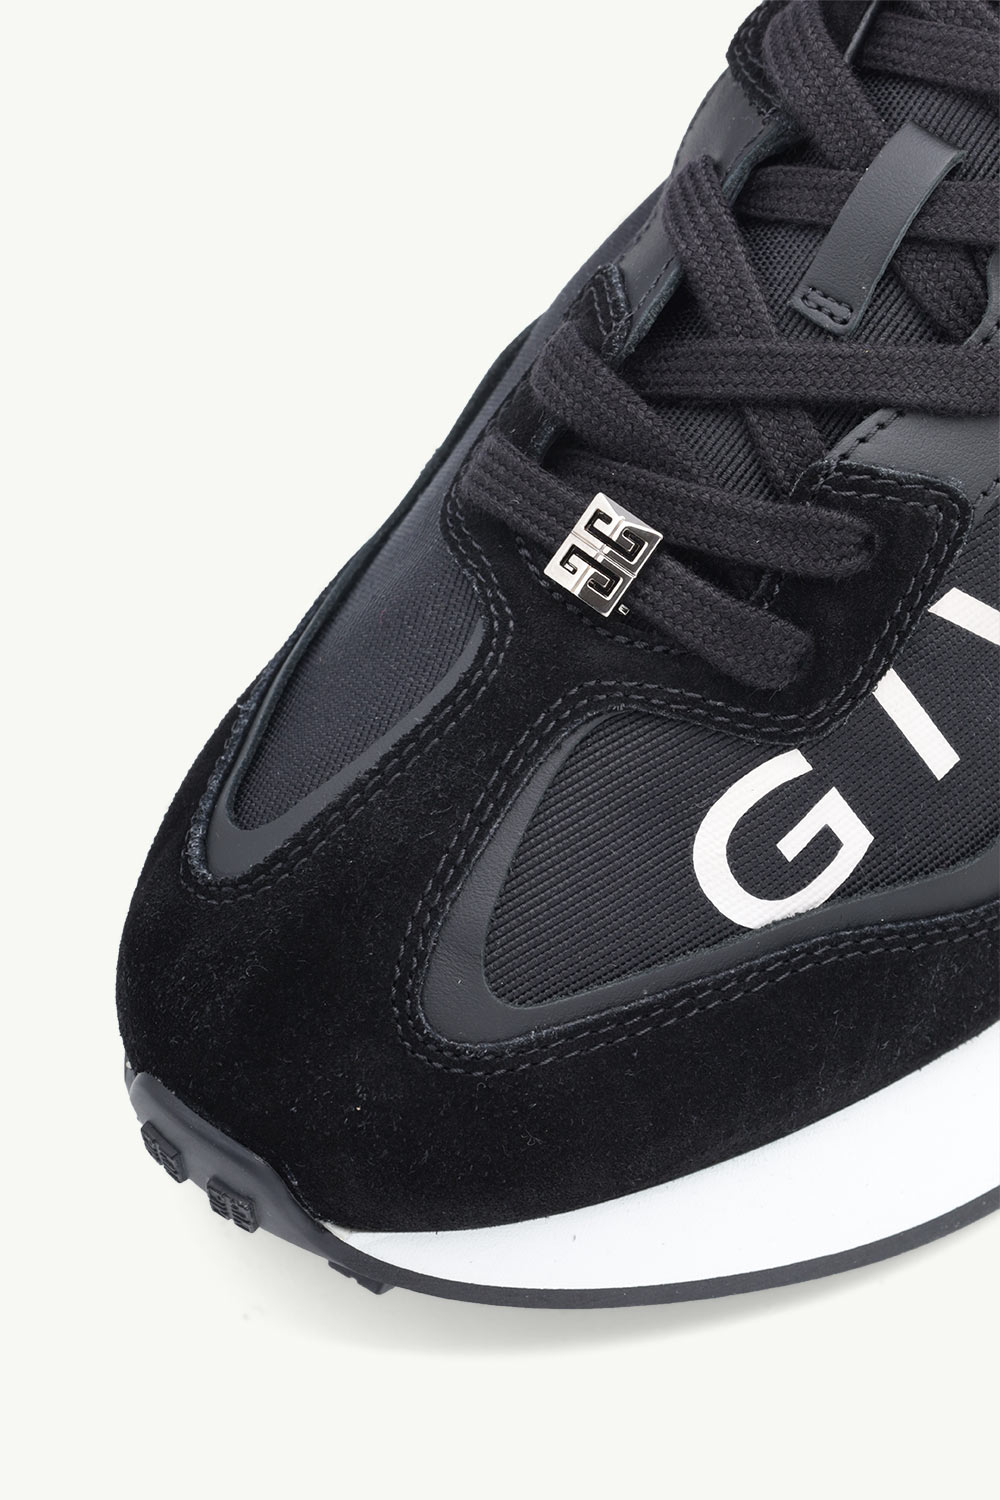 GIVENCHY Men GIV Runner Sneakers in Black/White Suede x Nylon 4